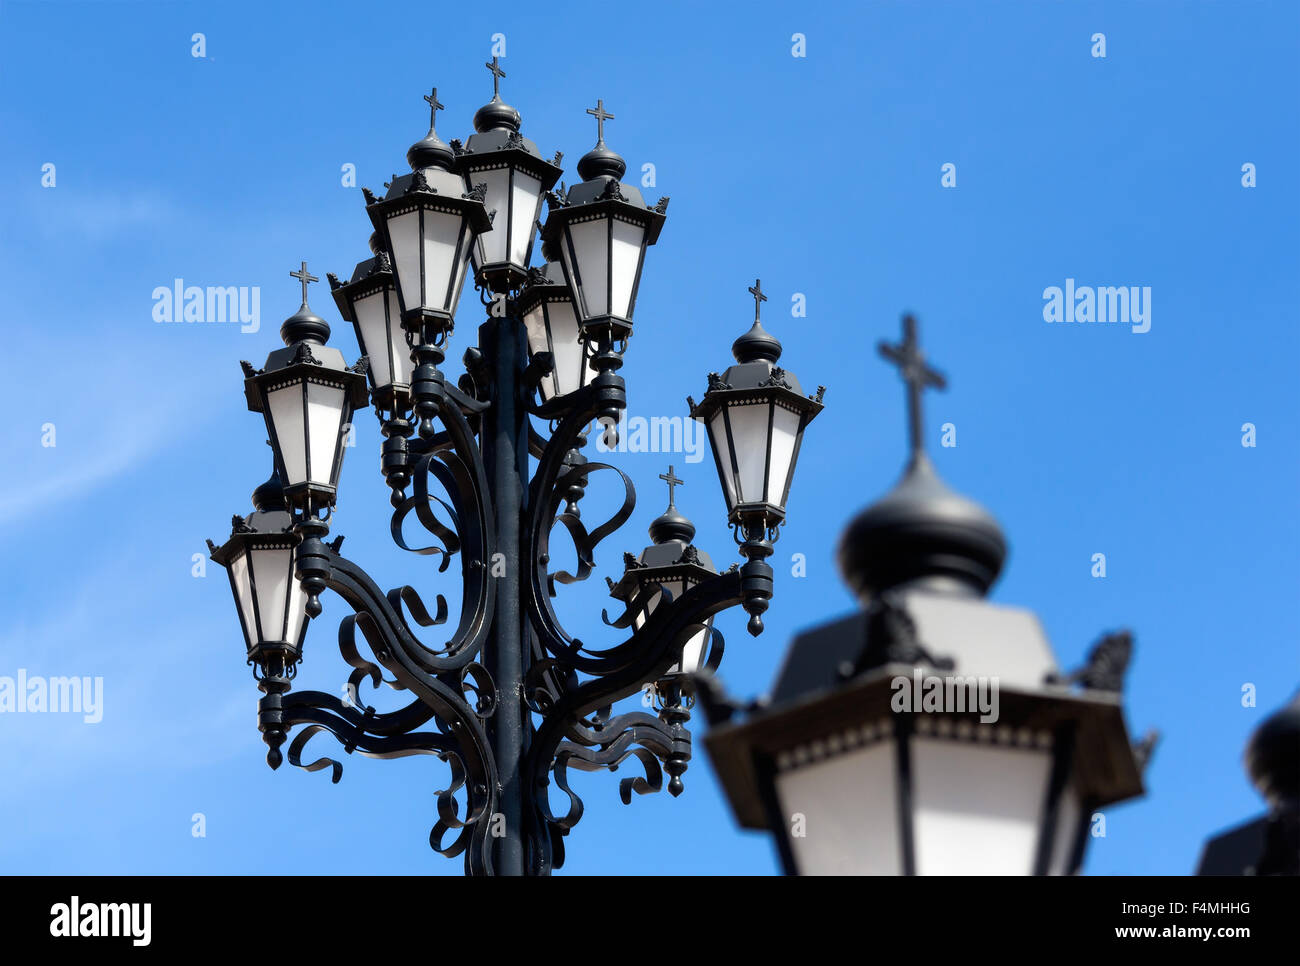 Close-up of the old-fashioned lanterns near the Cathedral of Christ the Savior in Moscow, Russia. Stock Photo